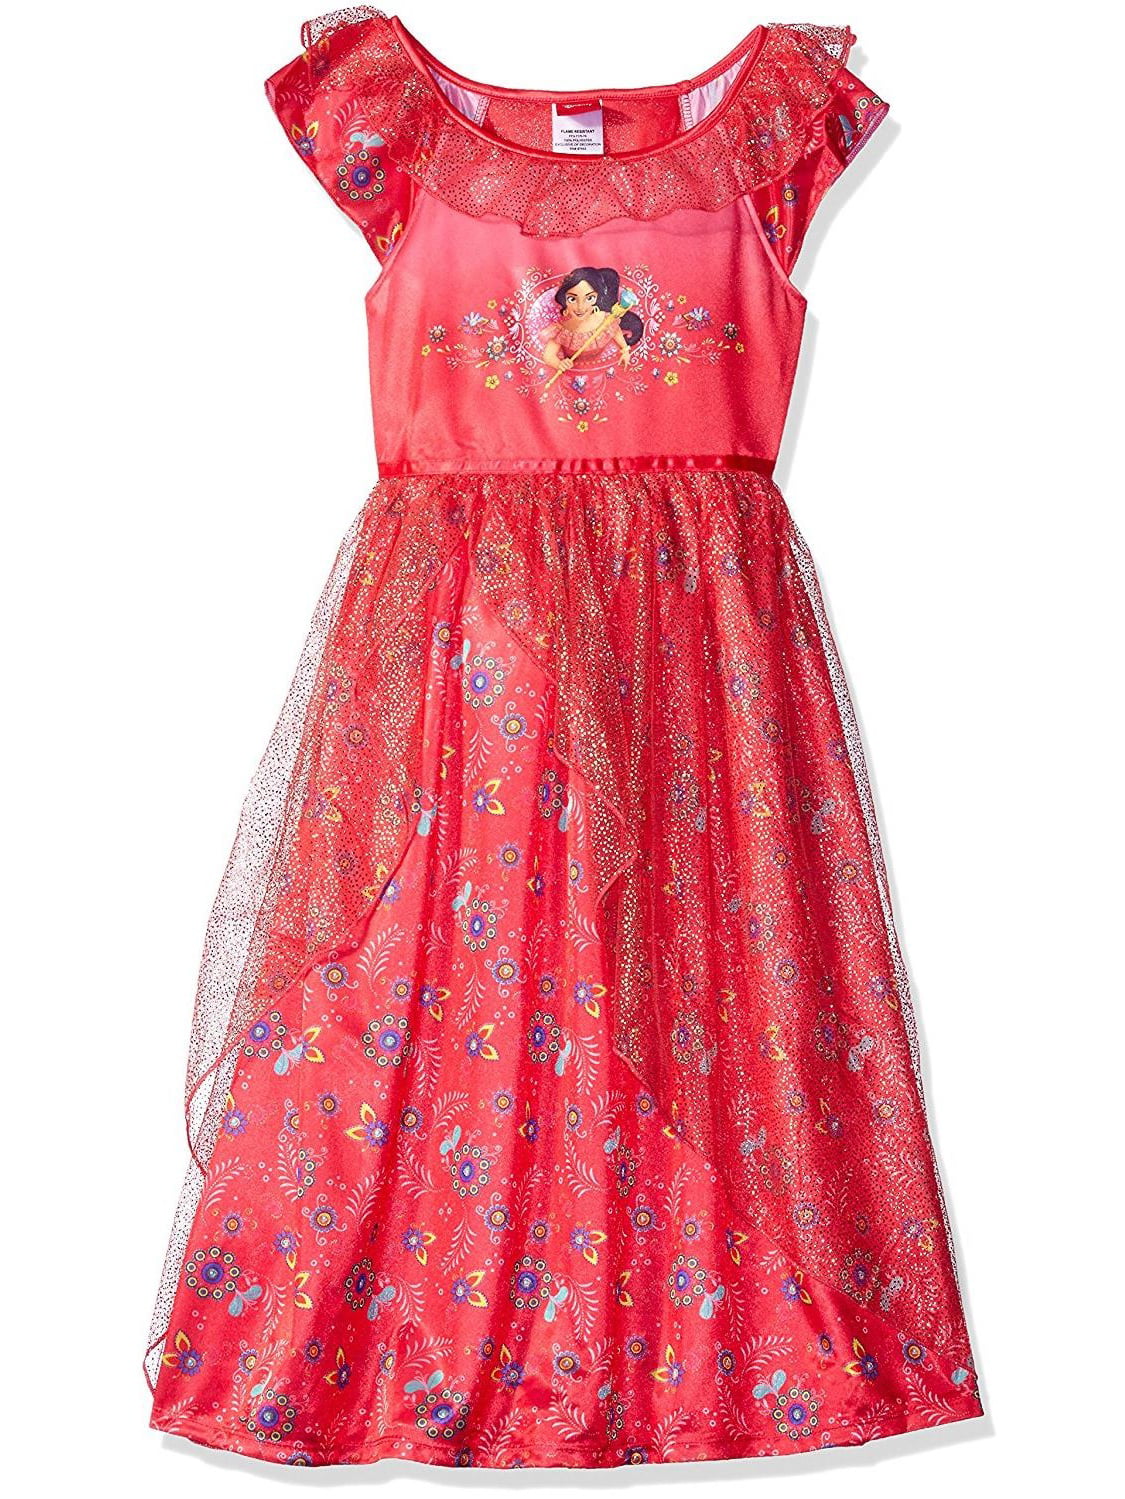 Details about   Disney Toddler Girls' Elena Of Avalor Fantasy Nightgown Red As Royalty 